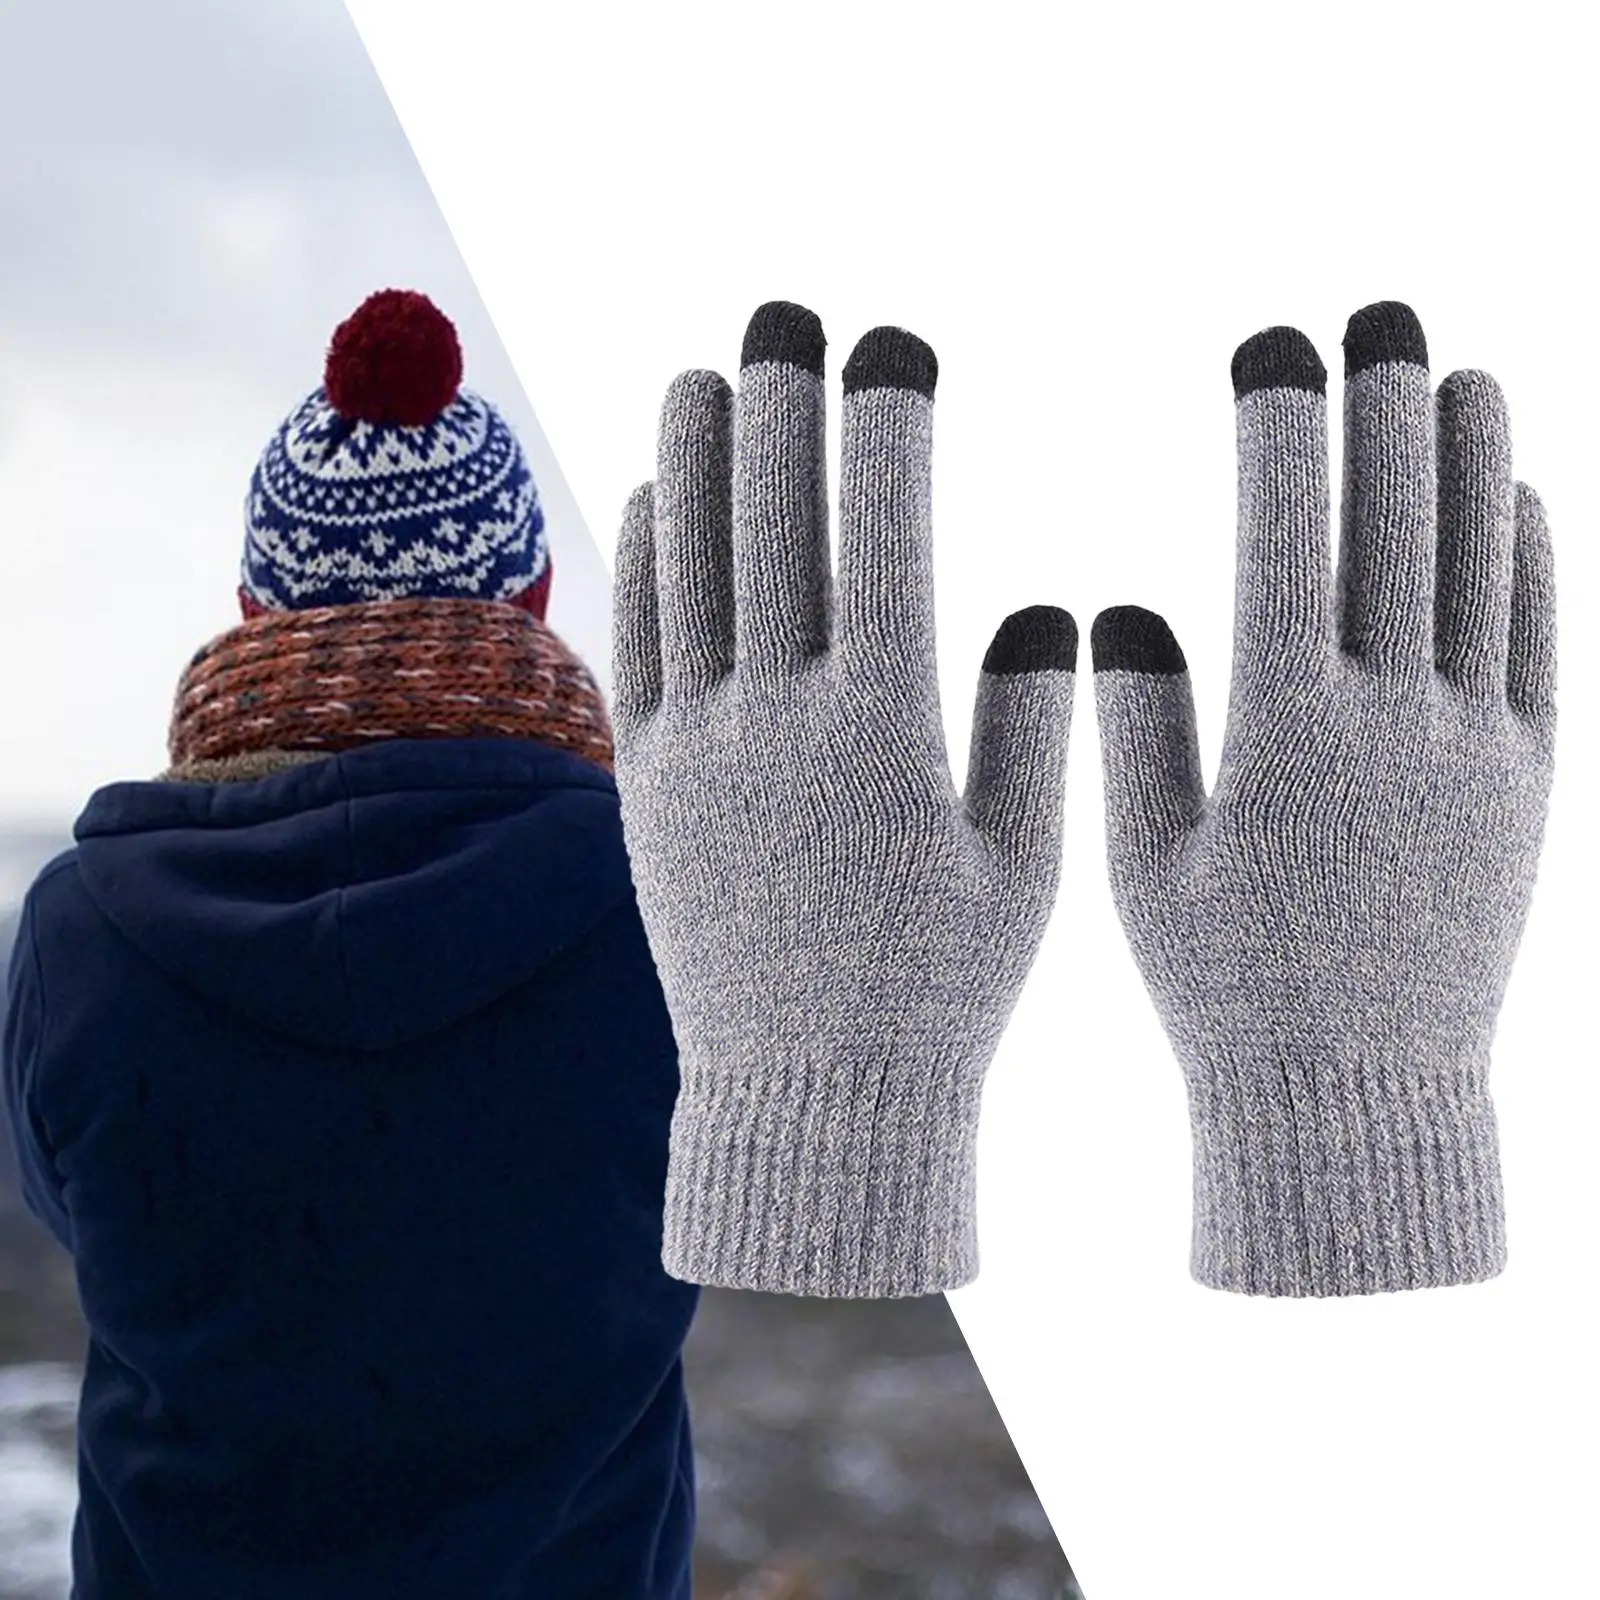 Winter Men Women Gloves Touch Screen Cold Weather Windproof Gloves Outdoor Sports Warm Thermal Running Ski Gloves